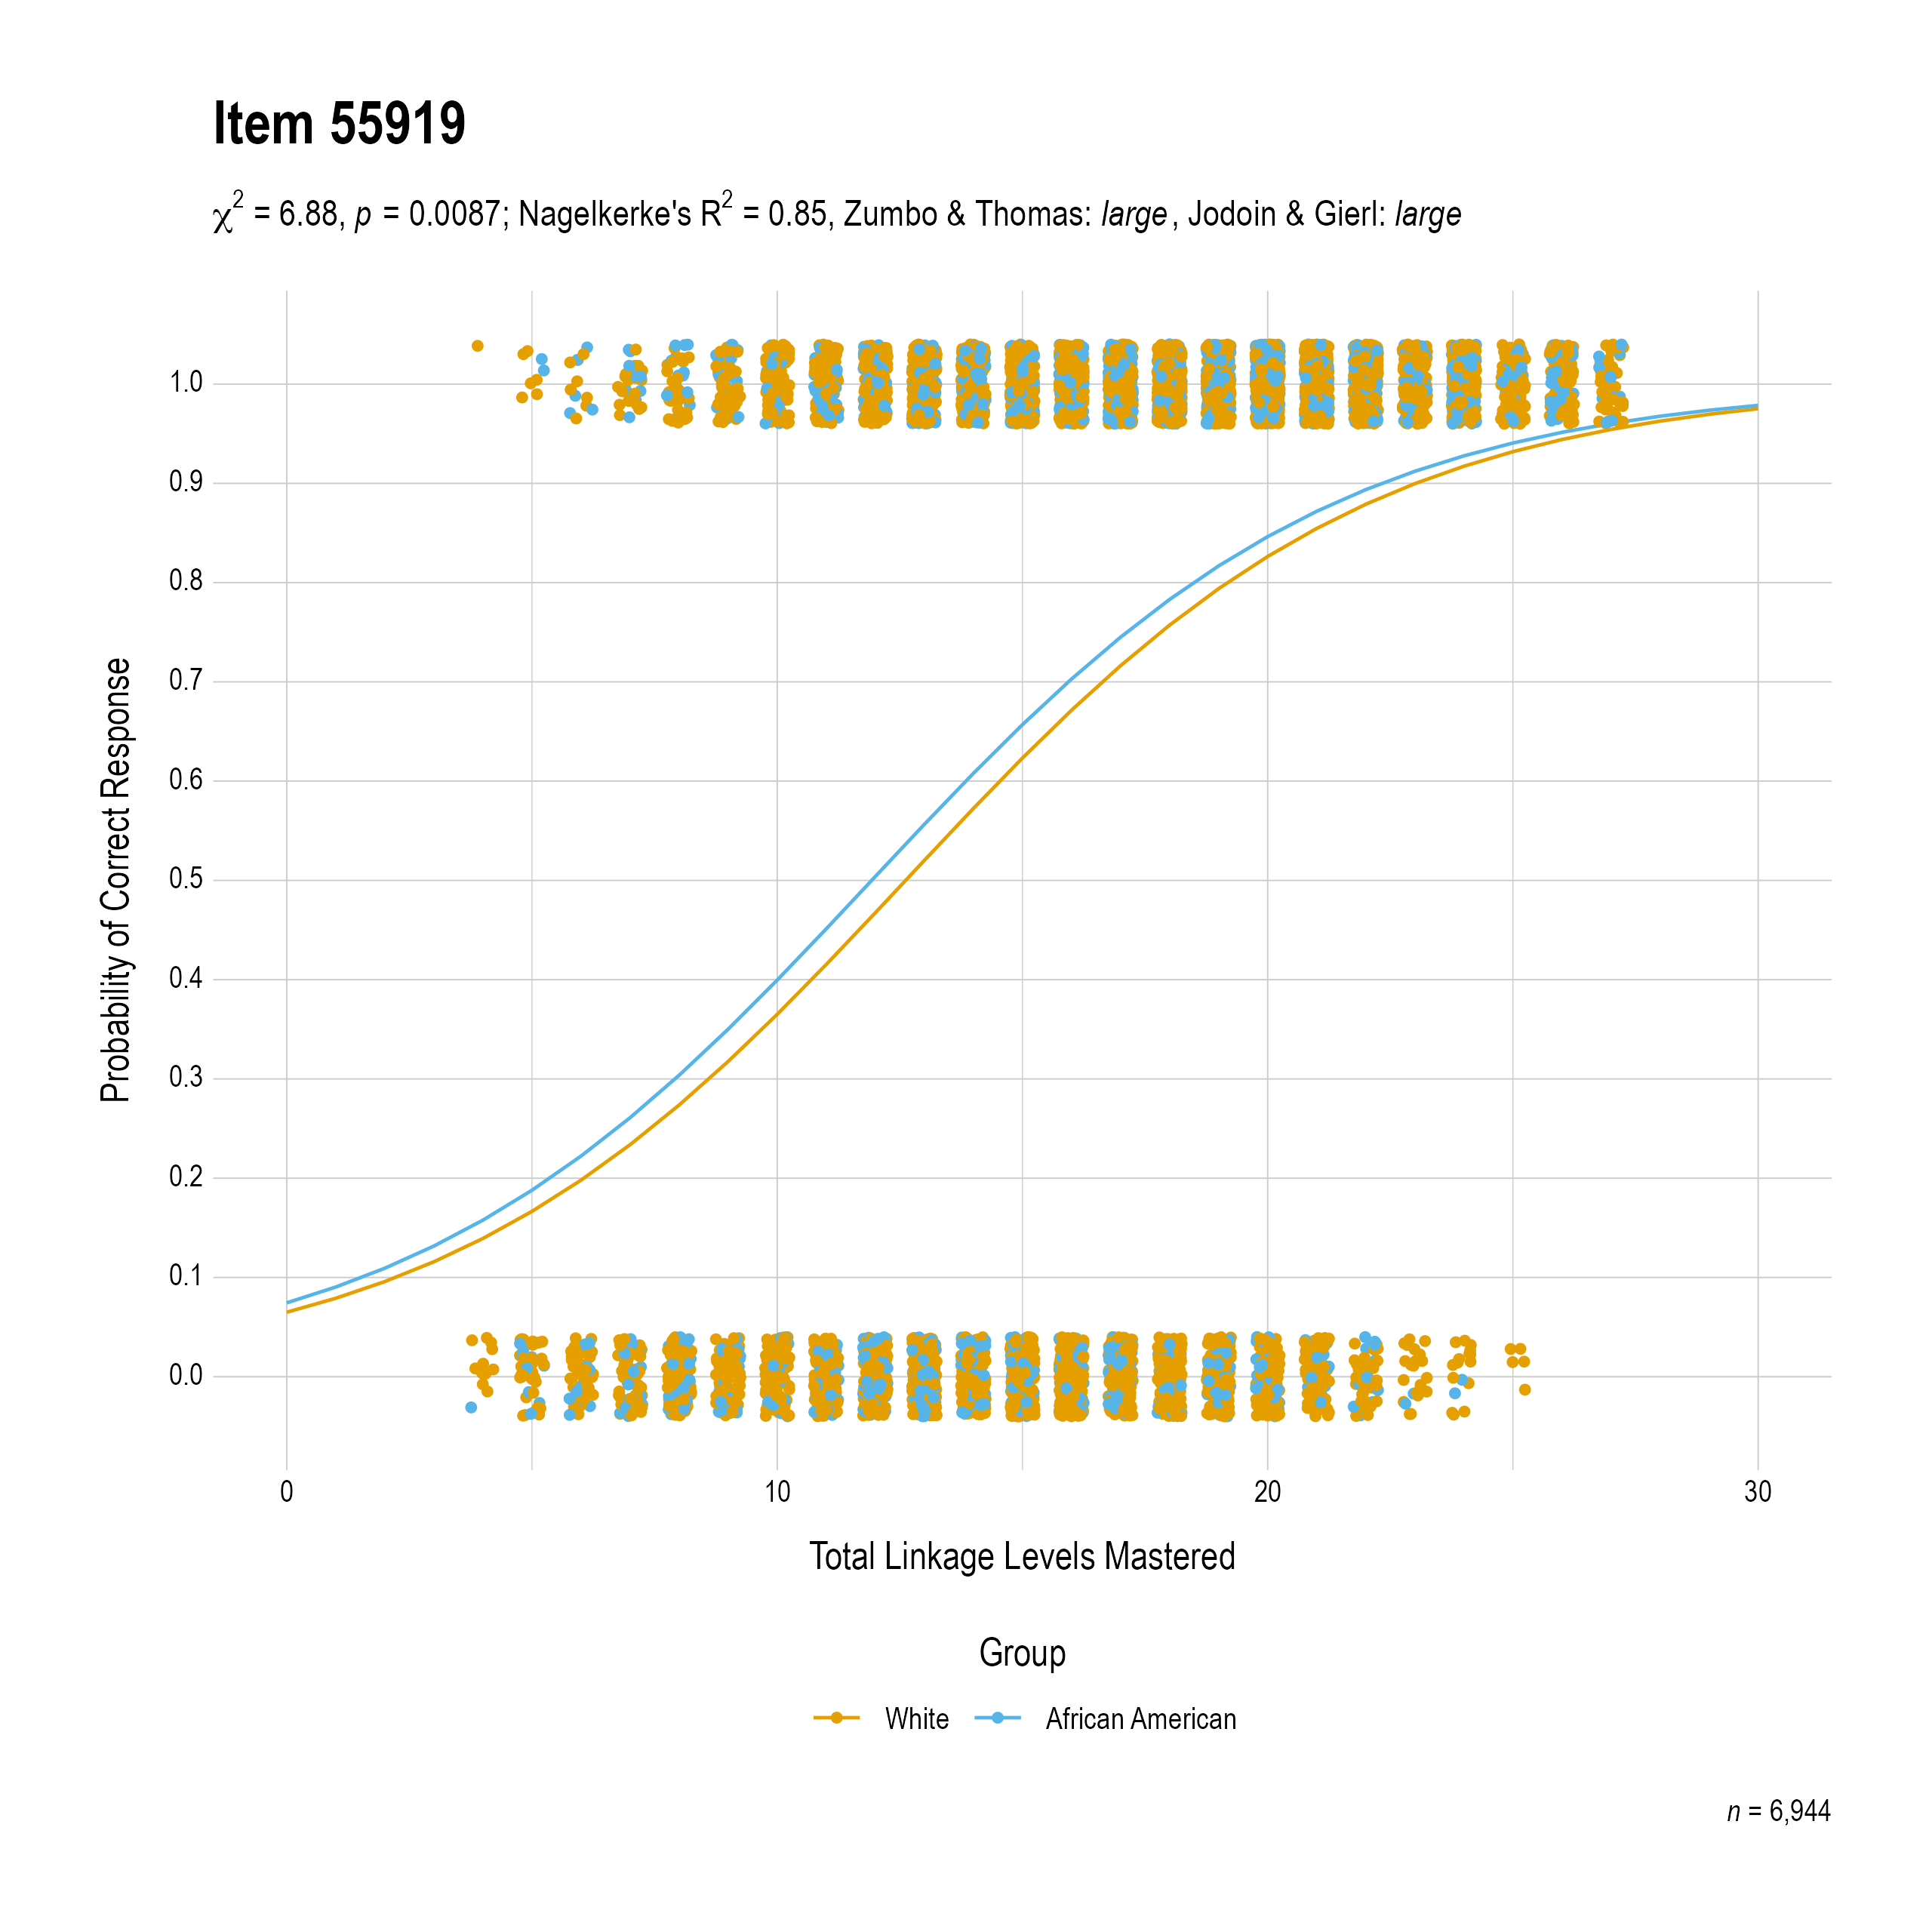 The plot of the uniform race differential item function evidence for Science item 55919. The figure contains points shaded by group. The figure also contains a logistic regression curve for each group. The total linkage levels mastered in is on the x-axis, and the probability of a correct response is on the y-axis.